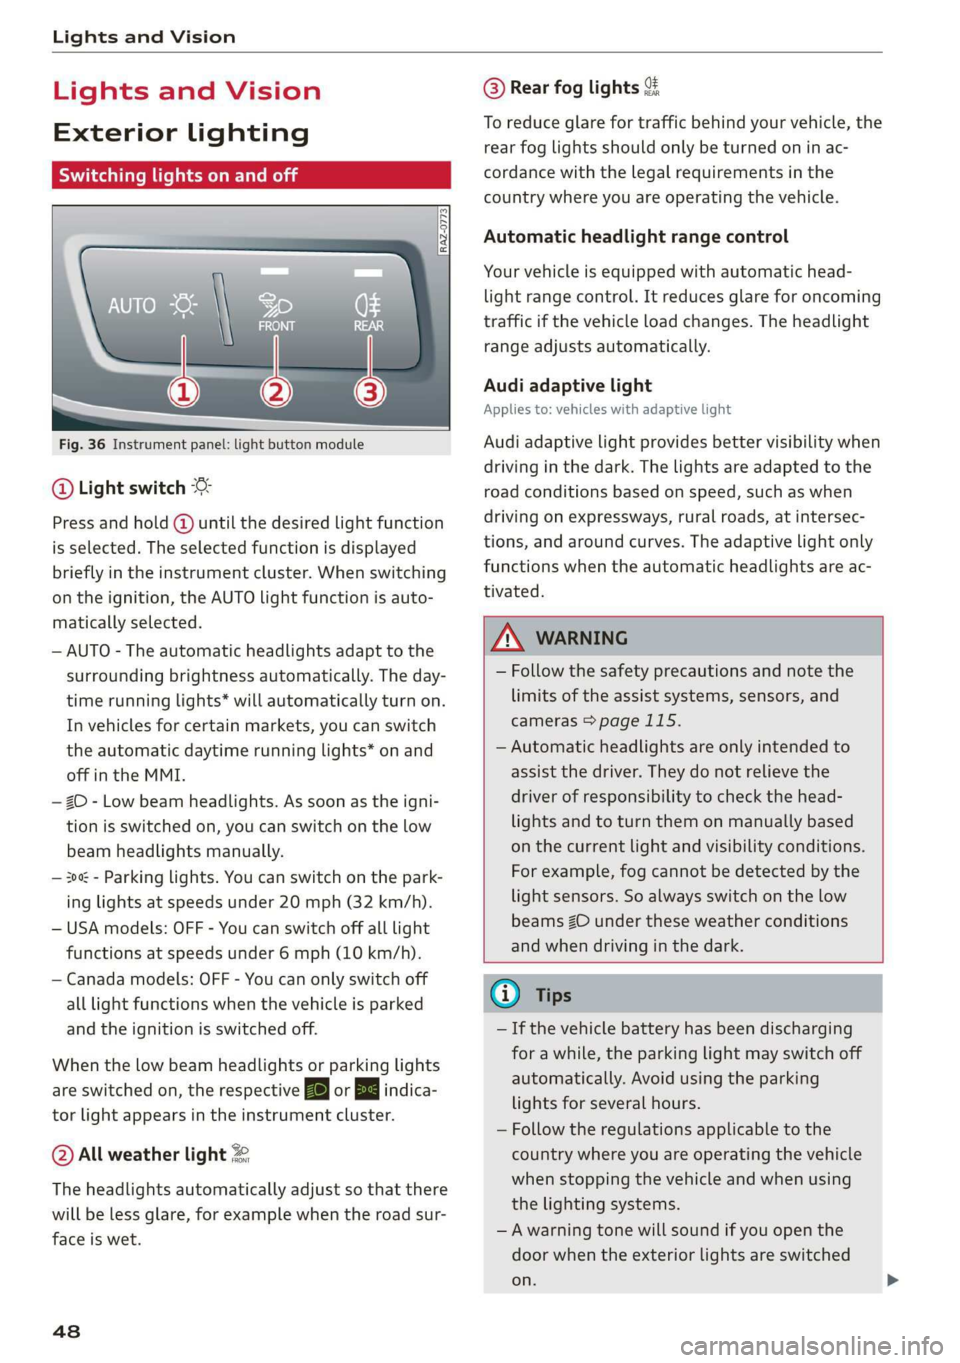 AUDI A7 2020  Owners Manual Lights and Vision 
  
Lights and Vision 
Exterior lighting 
Sitar MeL Lats eal 
  
  
Fig. 36 Instrument panel: light button module 
@ Light switch & 
Press and hold @ until the desired light function